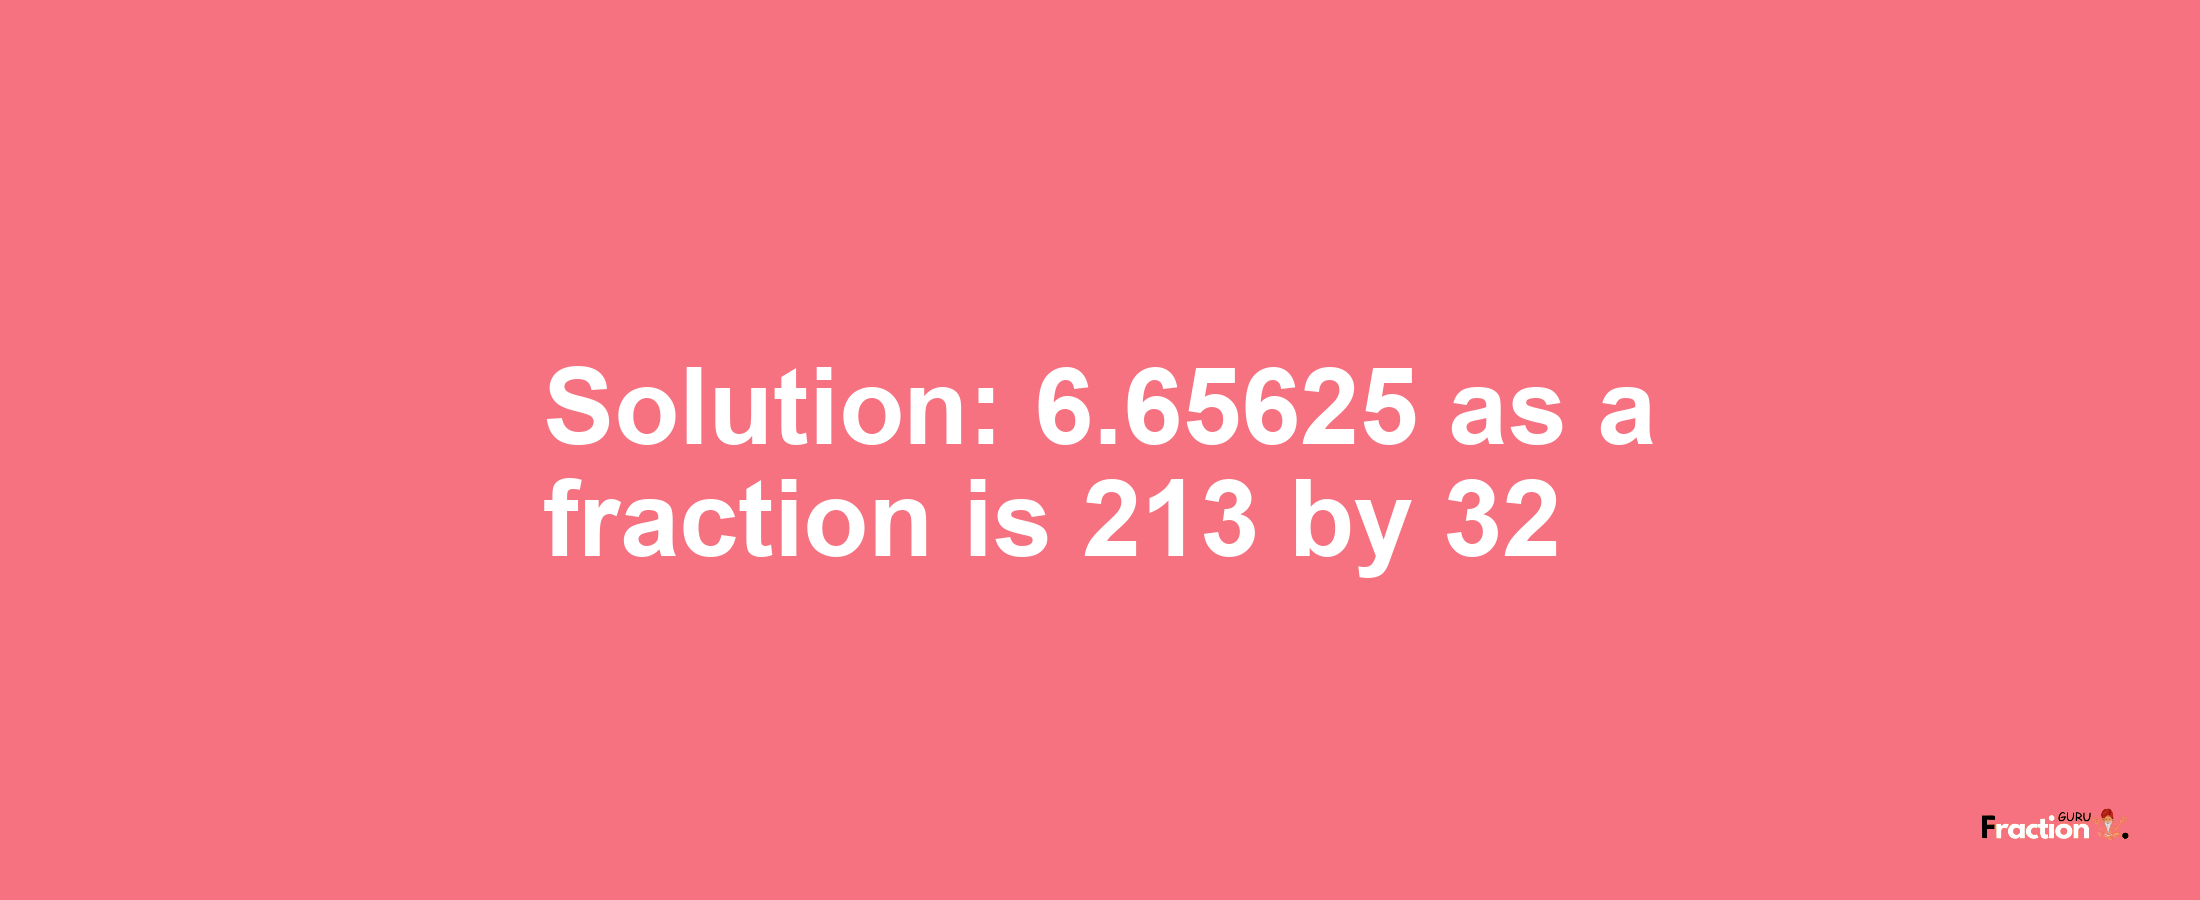 Solution:6.65625 as a fraction is 213/32